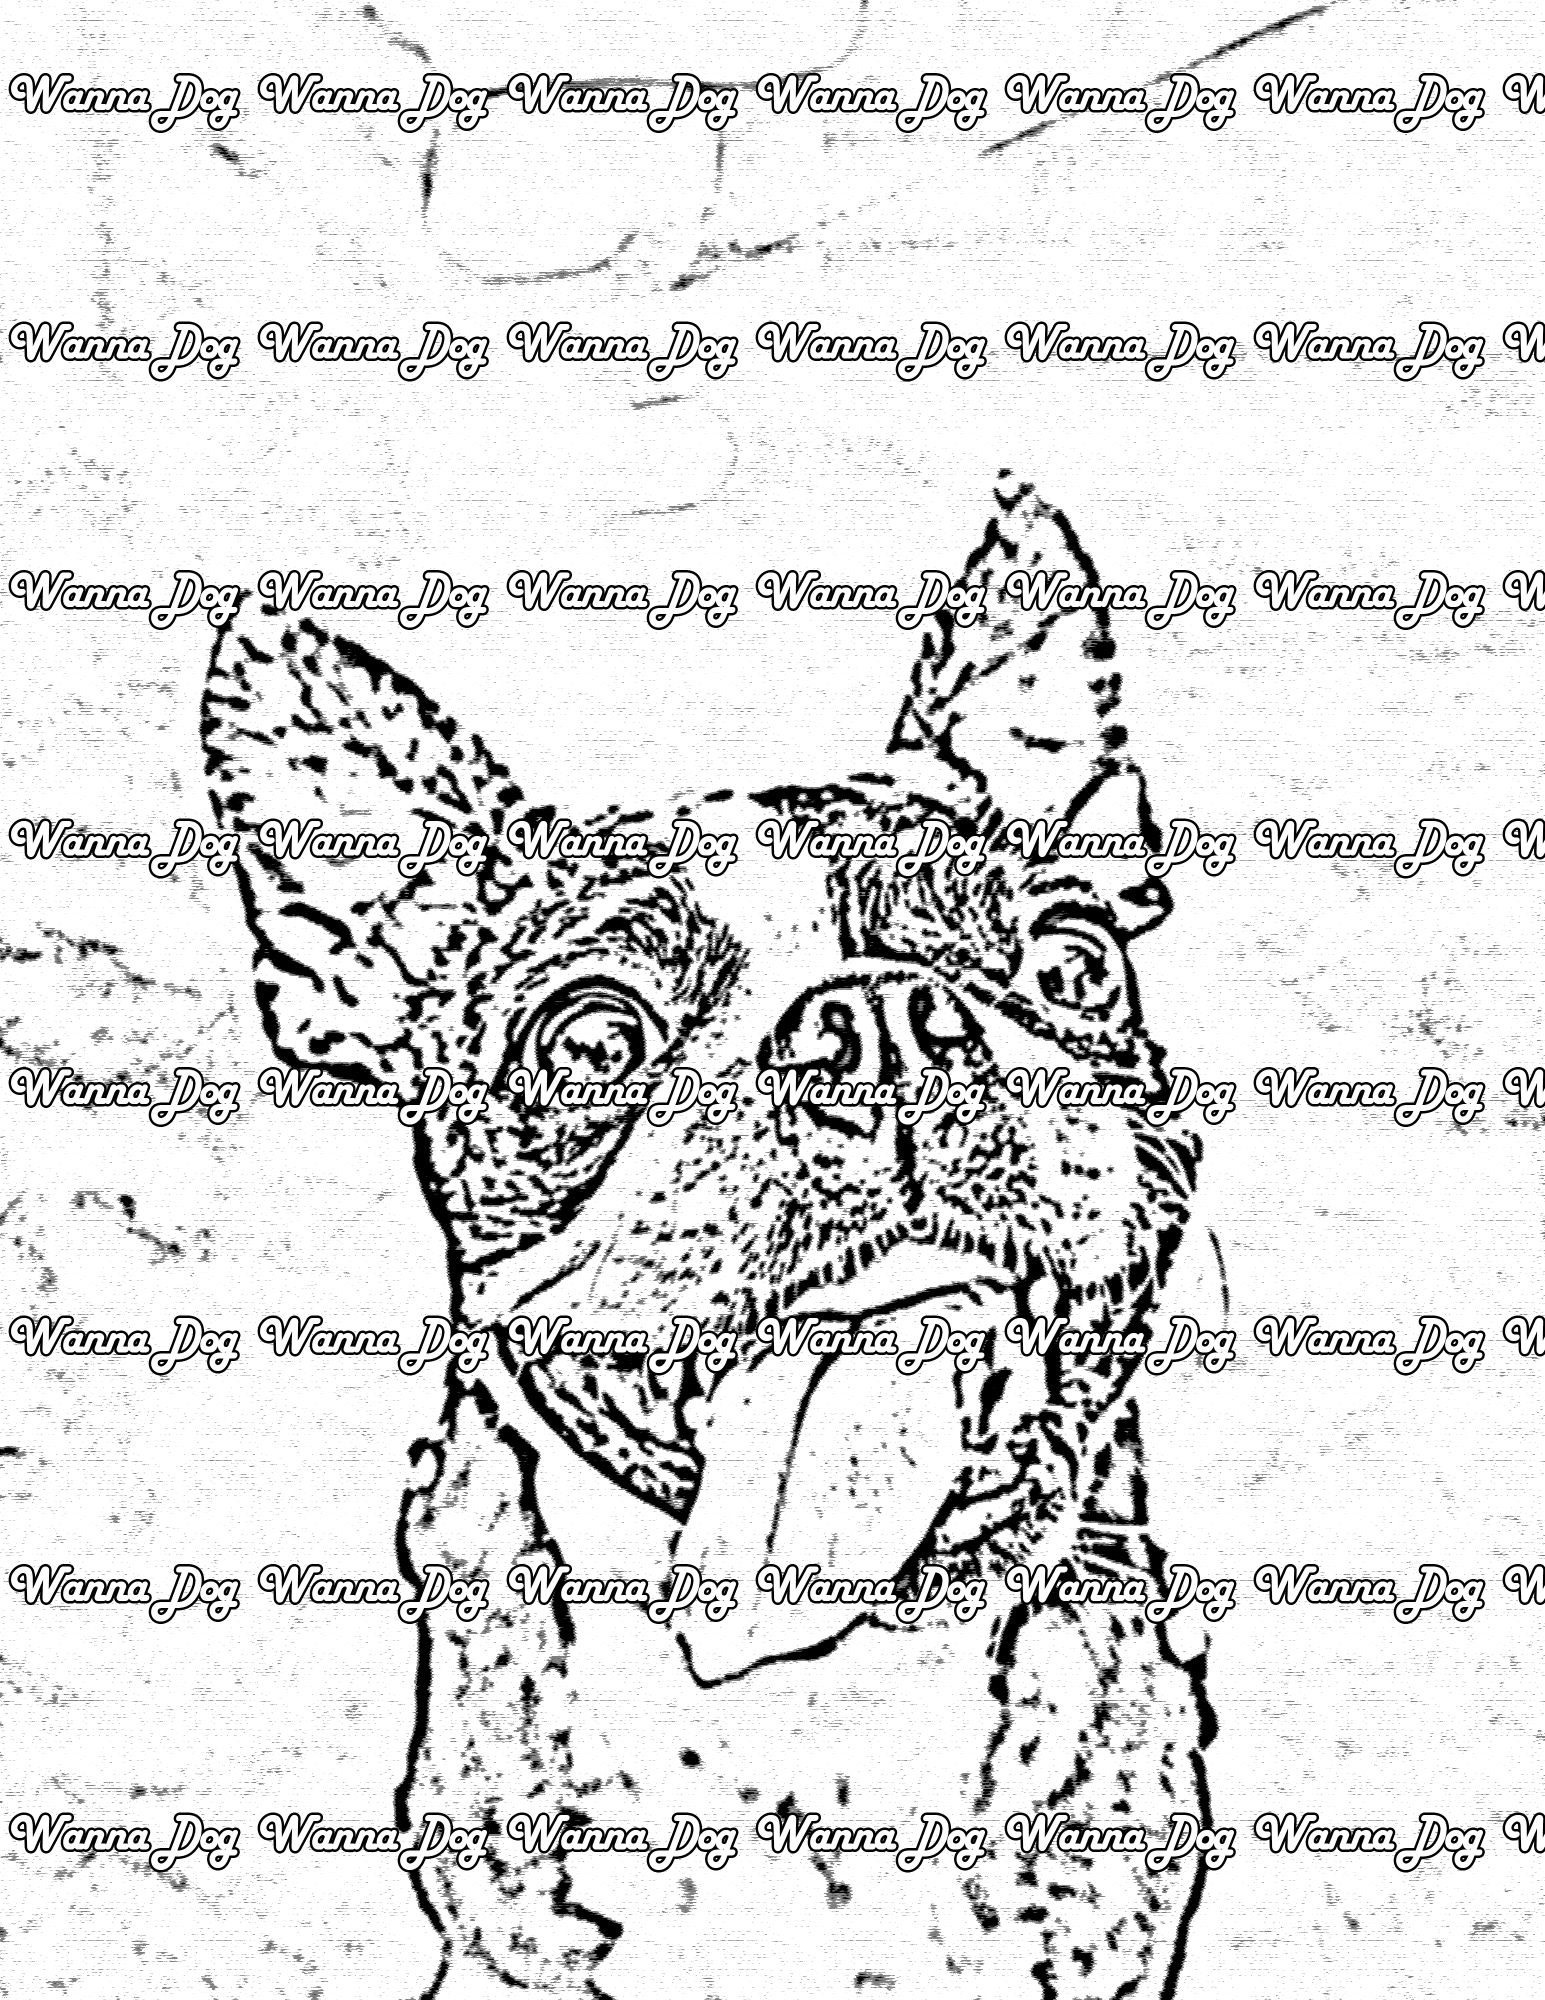 Boston Terrier Coloring Page of a Boston Terrier on a walk with their tongue out